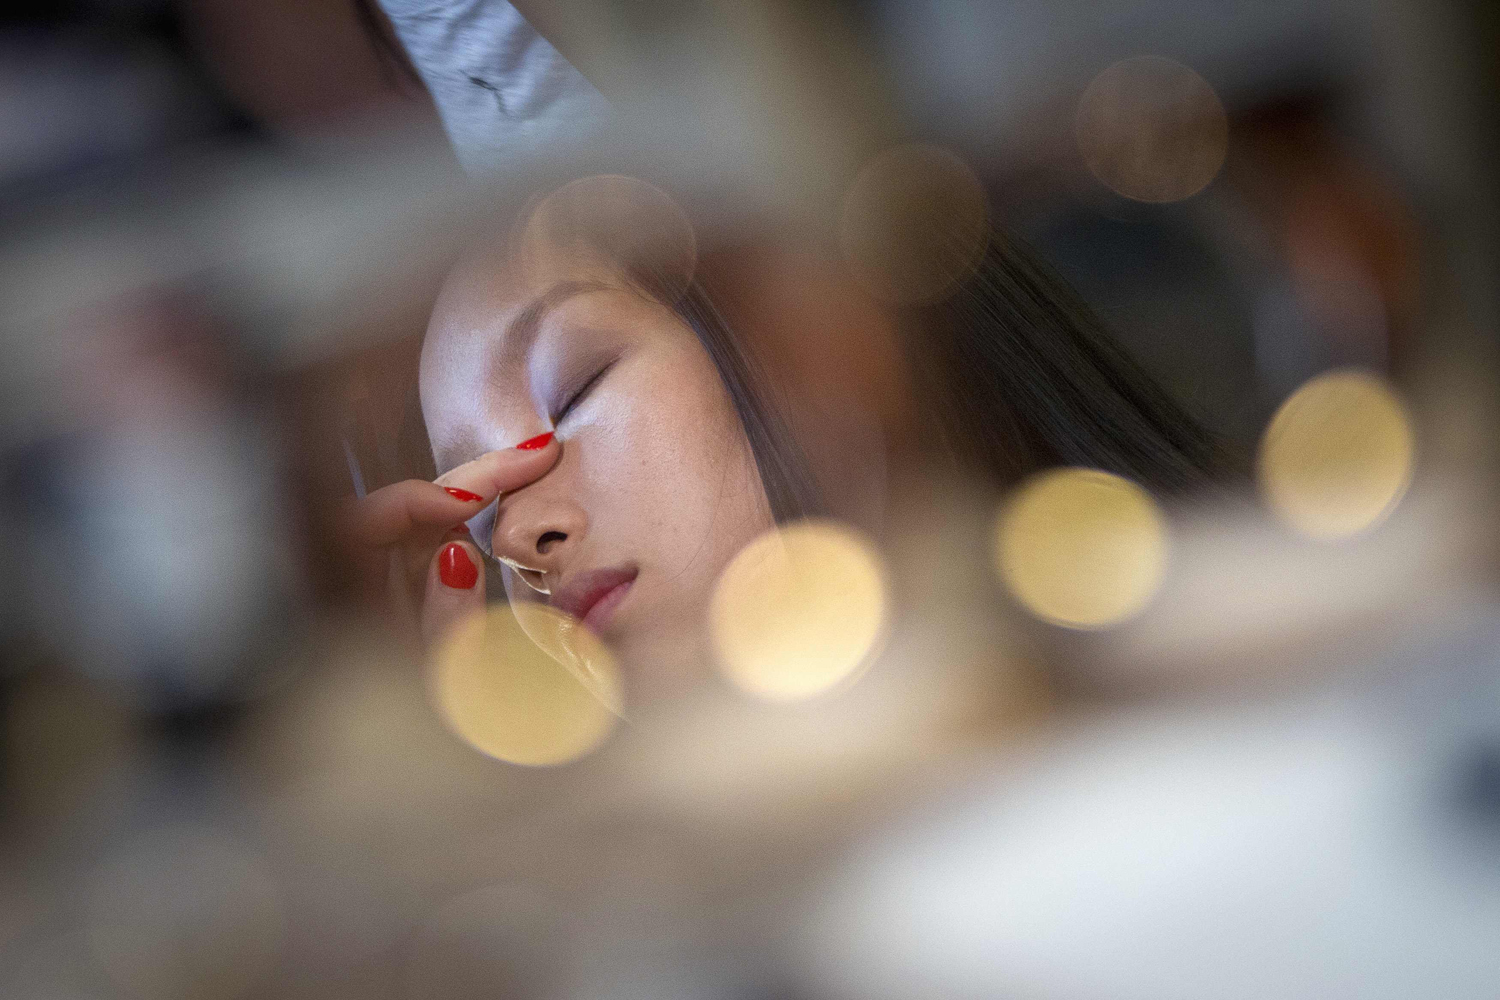 Sept. 8, 2014. A model is reflected in a mirror as she has her makeup applied before the Donna Karan Spring/Summer 2015 collection show during New York Fashion Week in the Manhattan borough of New York.